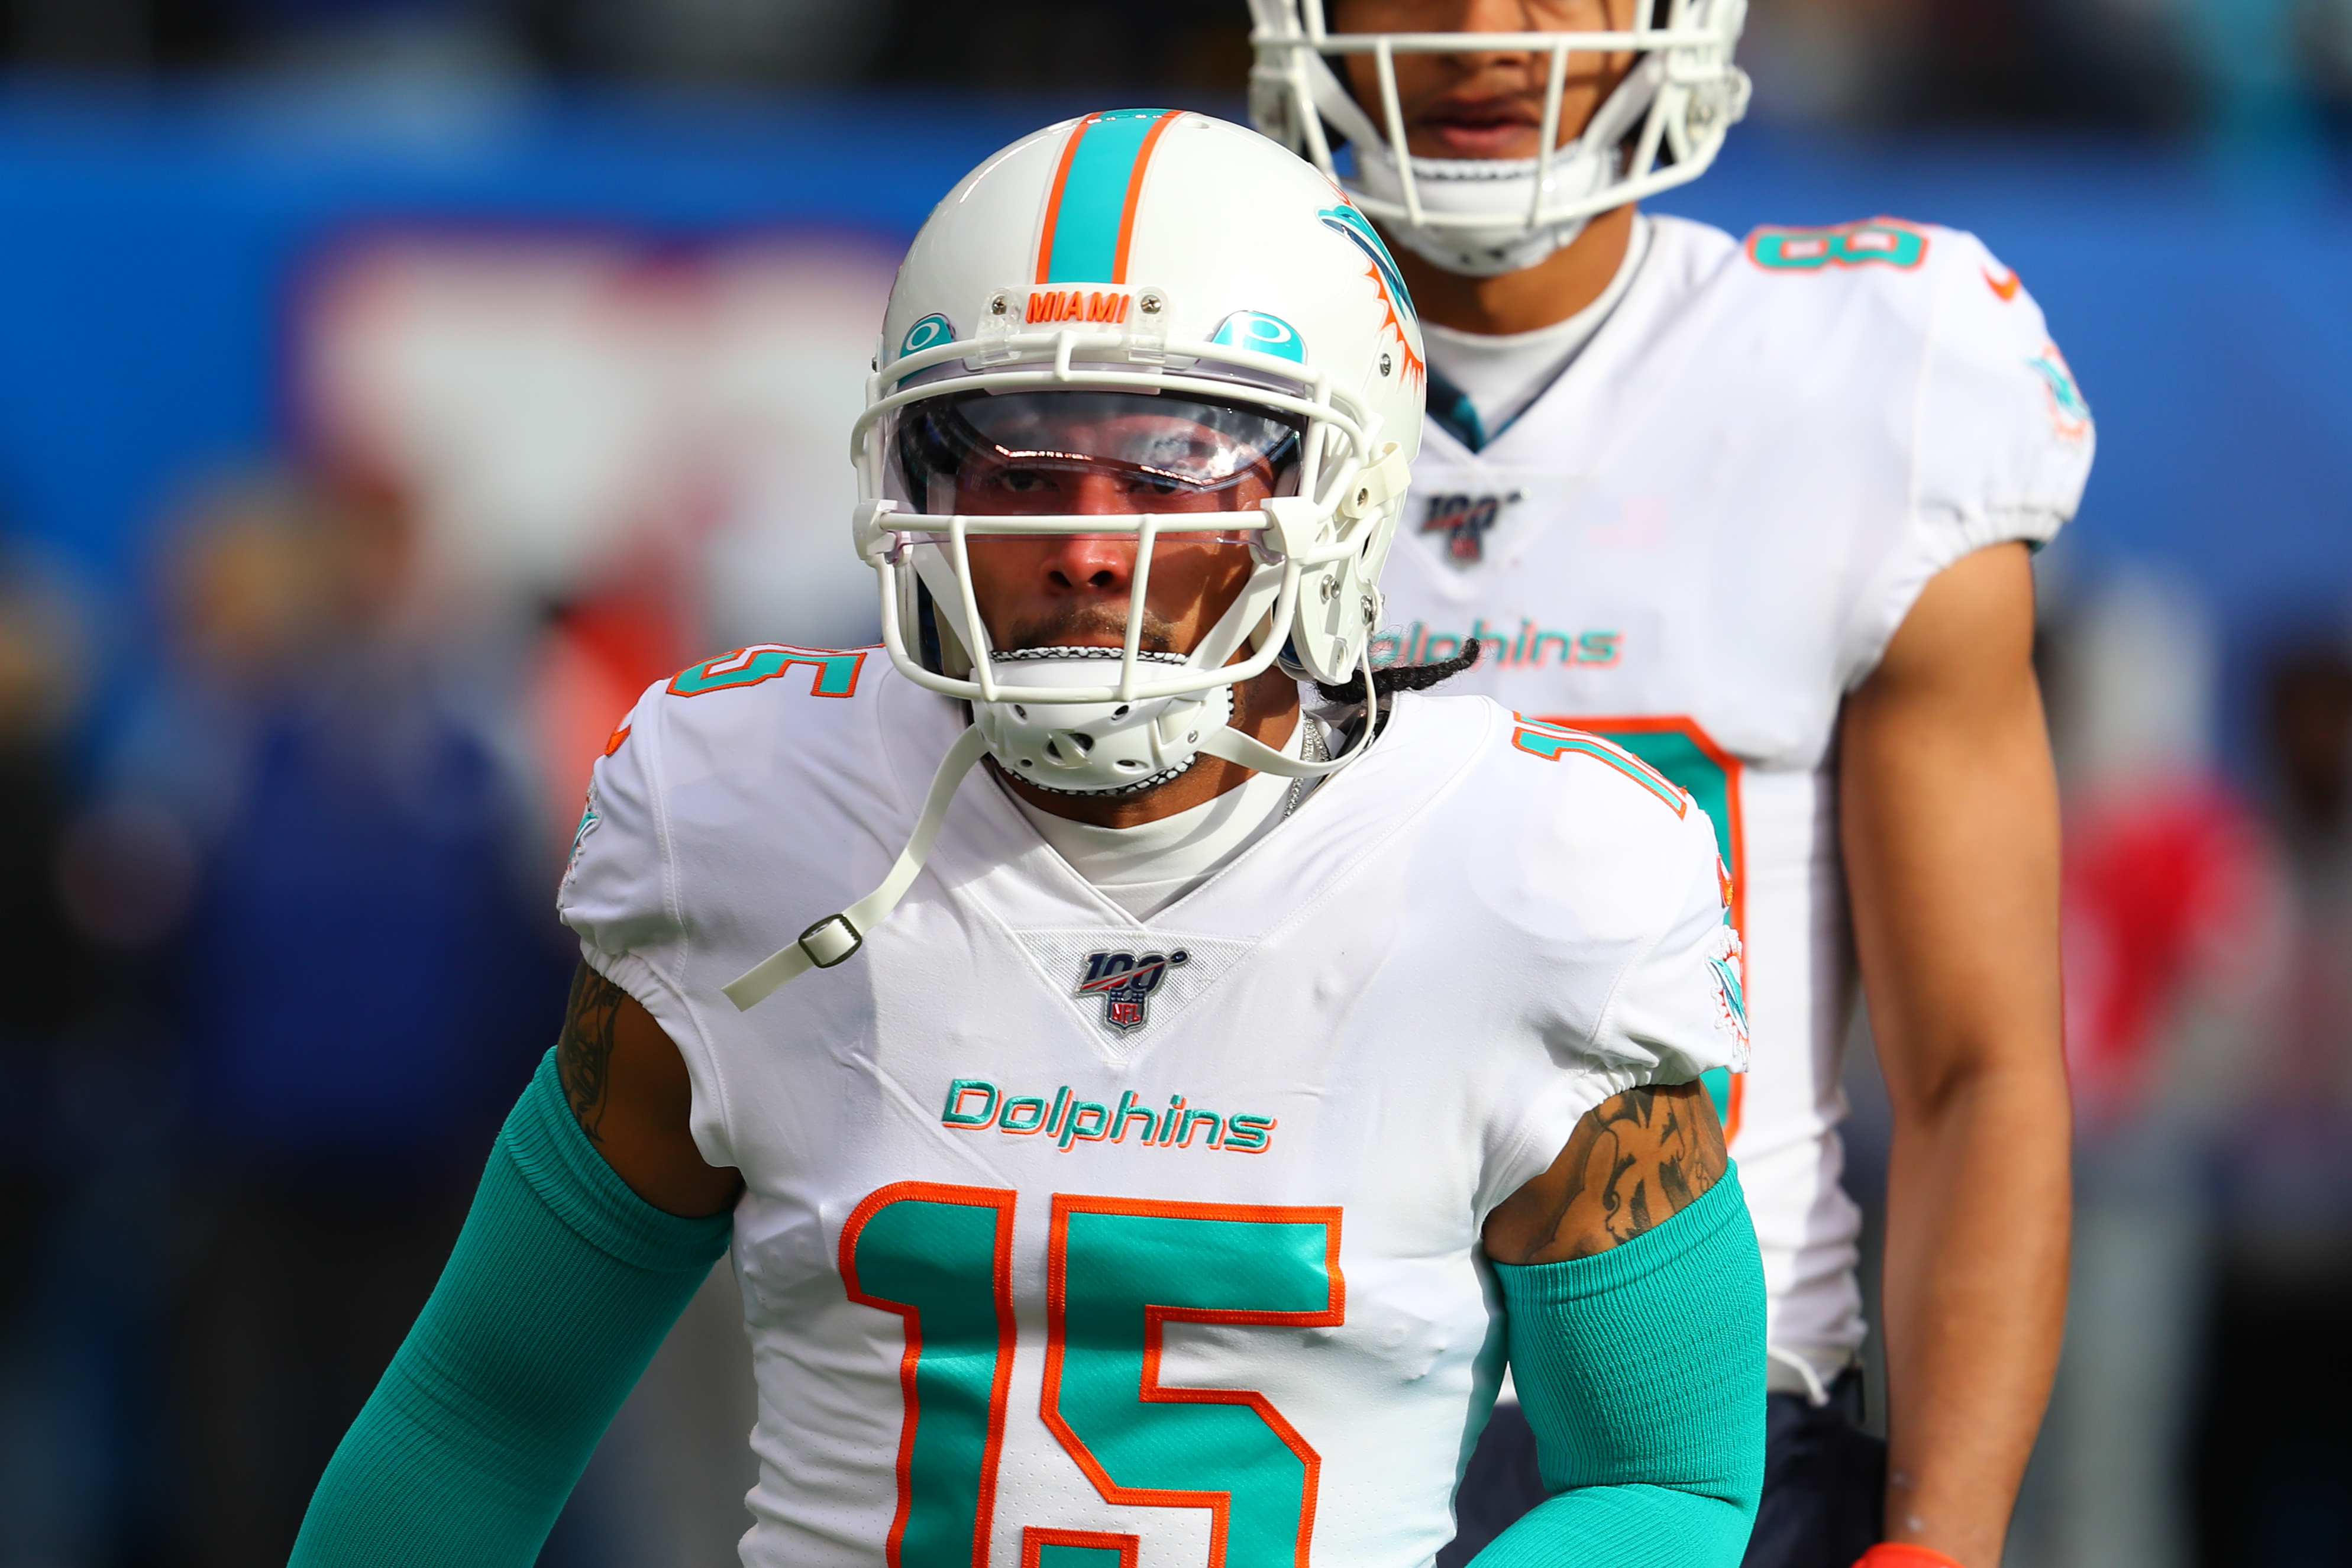 NFL: DEC 15 Dolphins at Giants